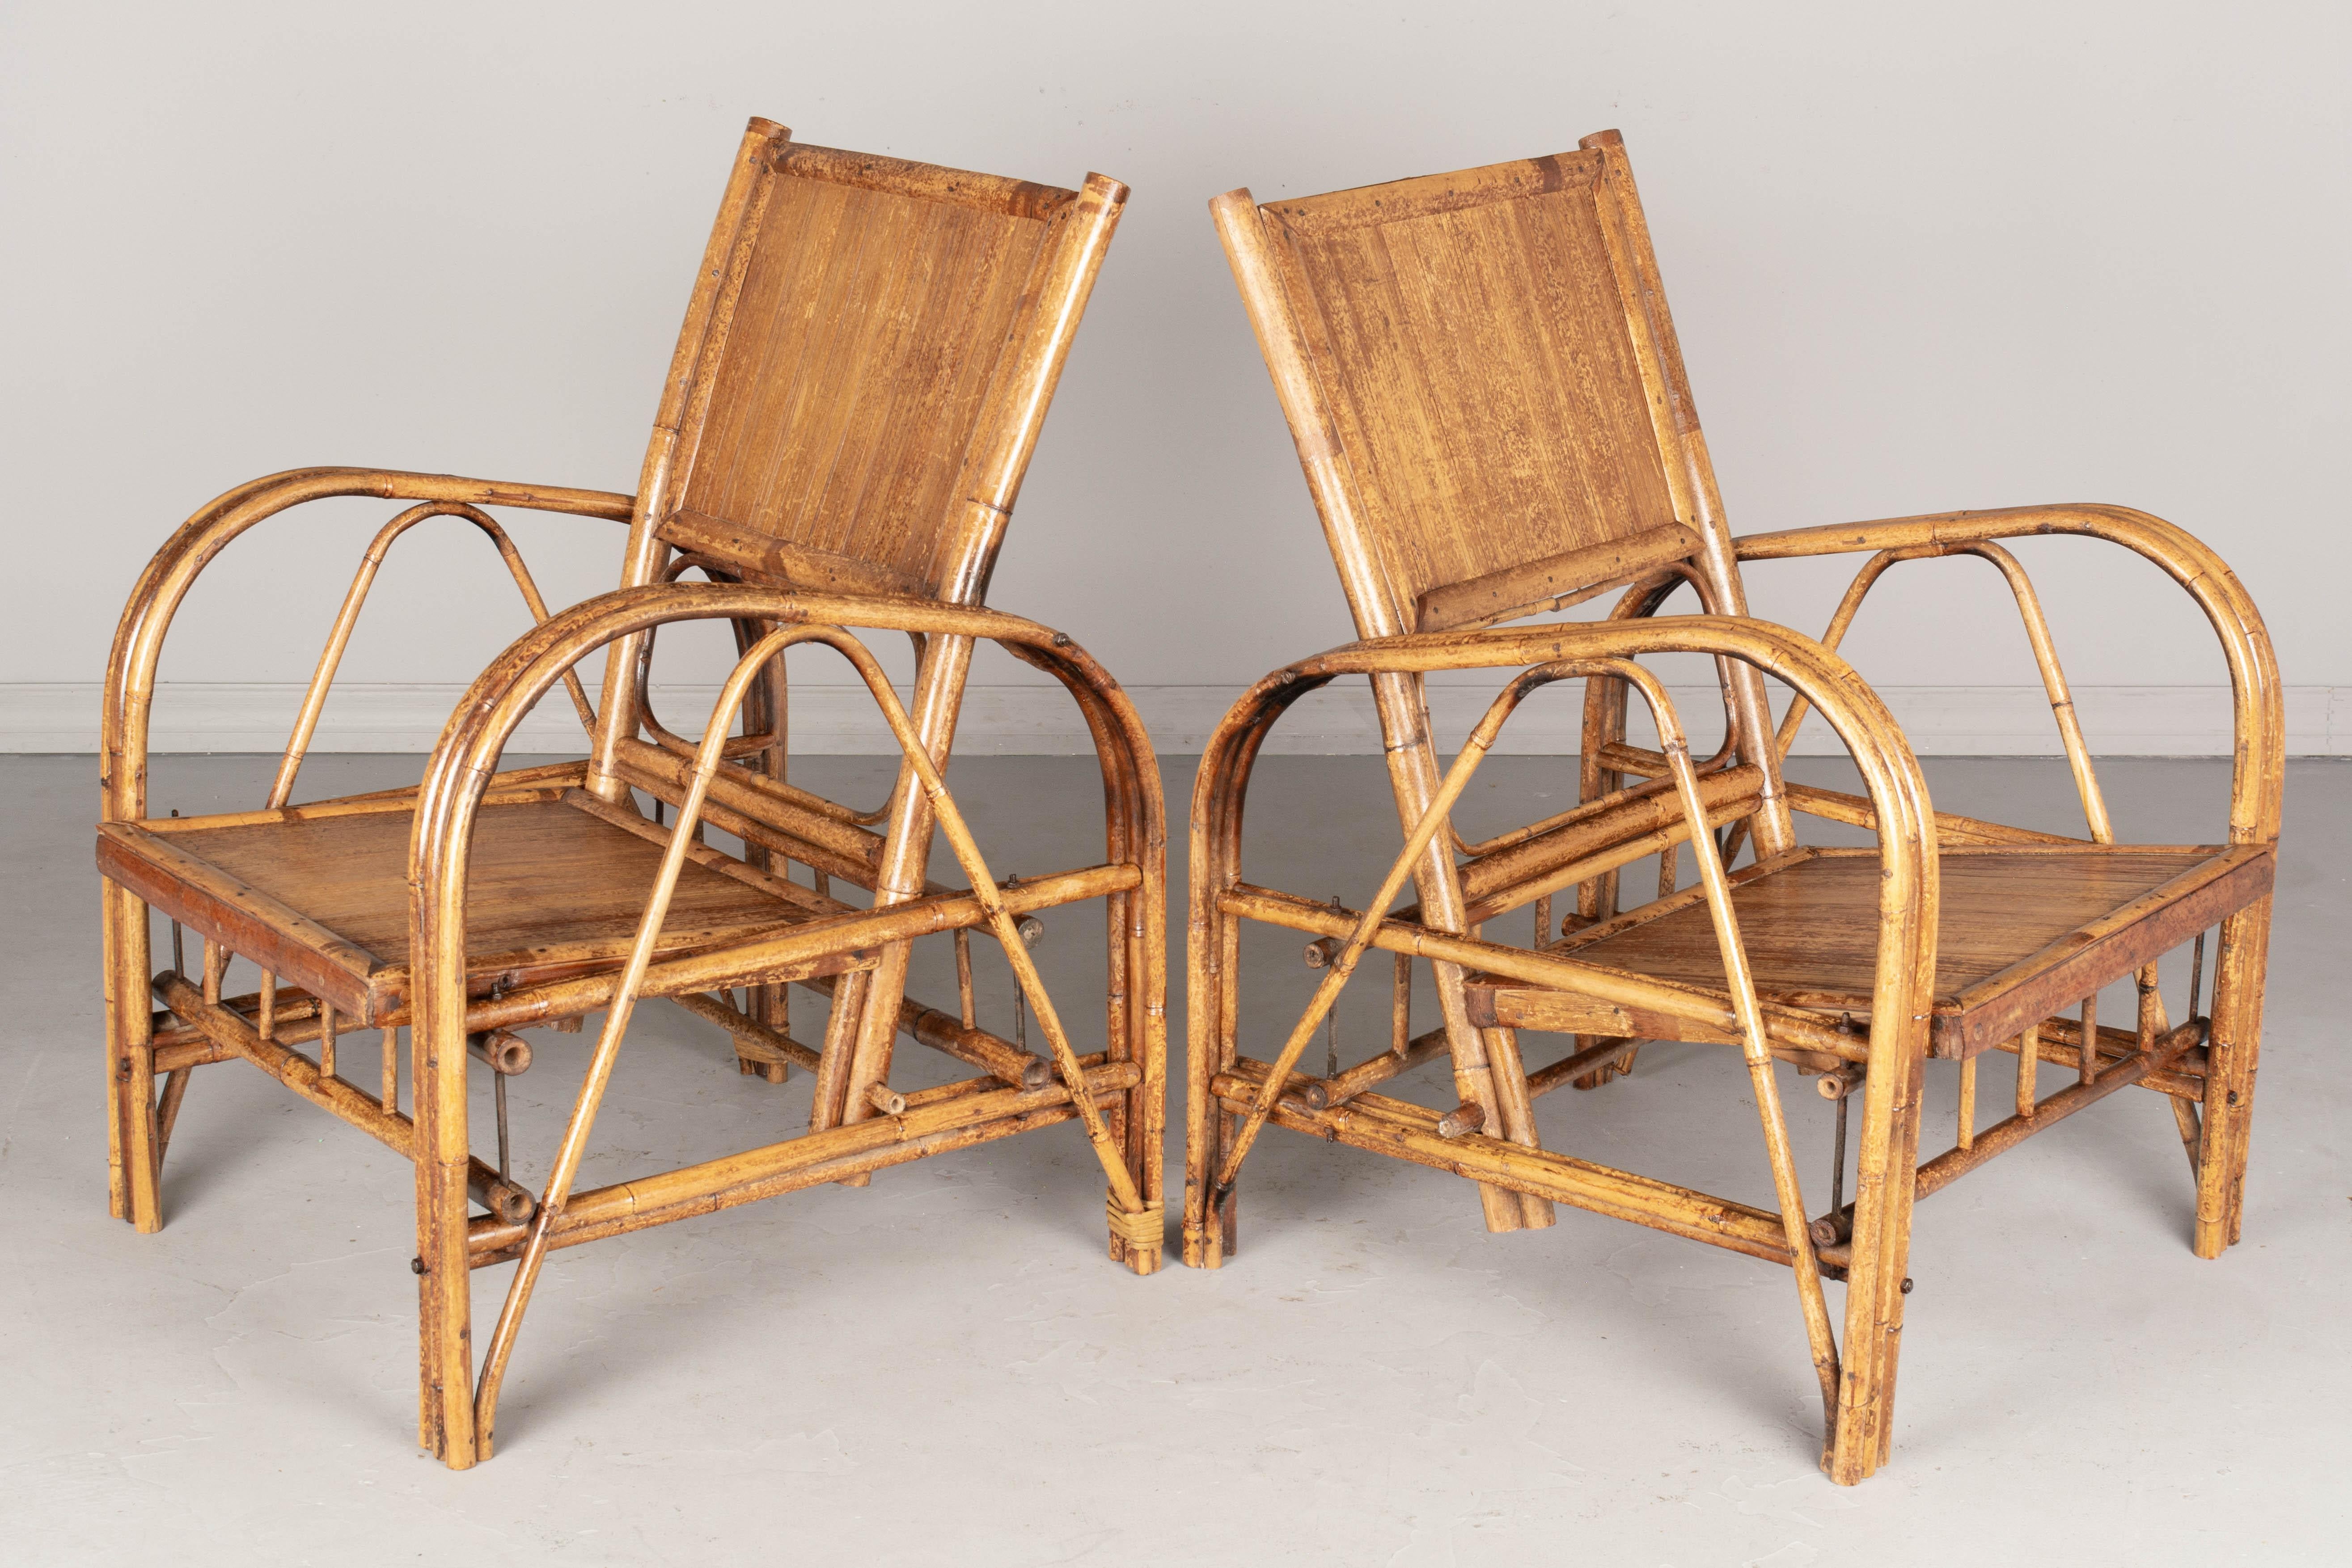 Hand-Crafted Pair of French Art Deco Bamboo Lounge Chairs